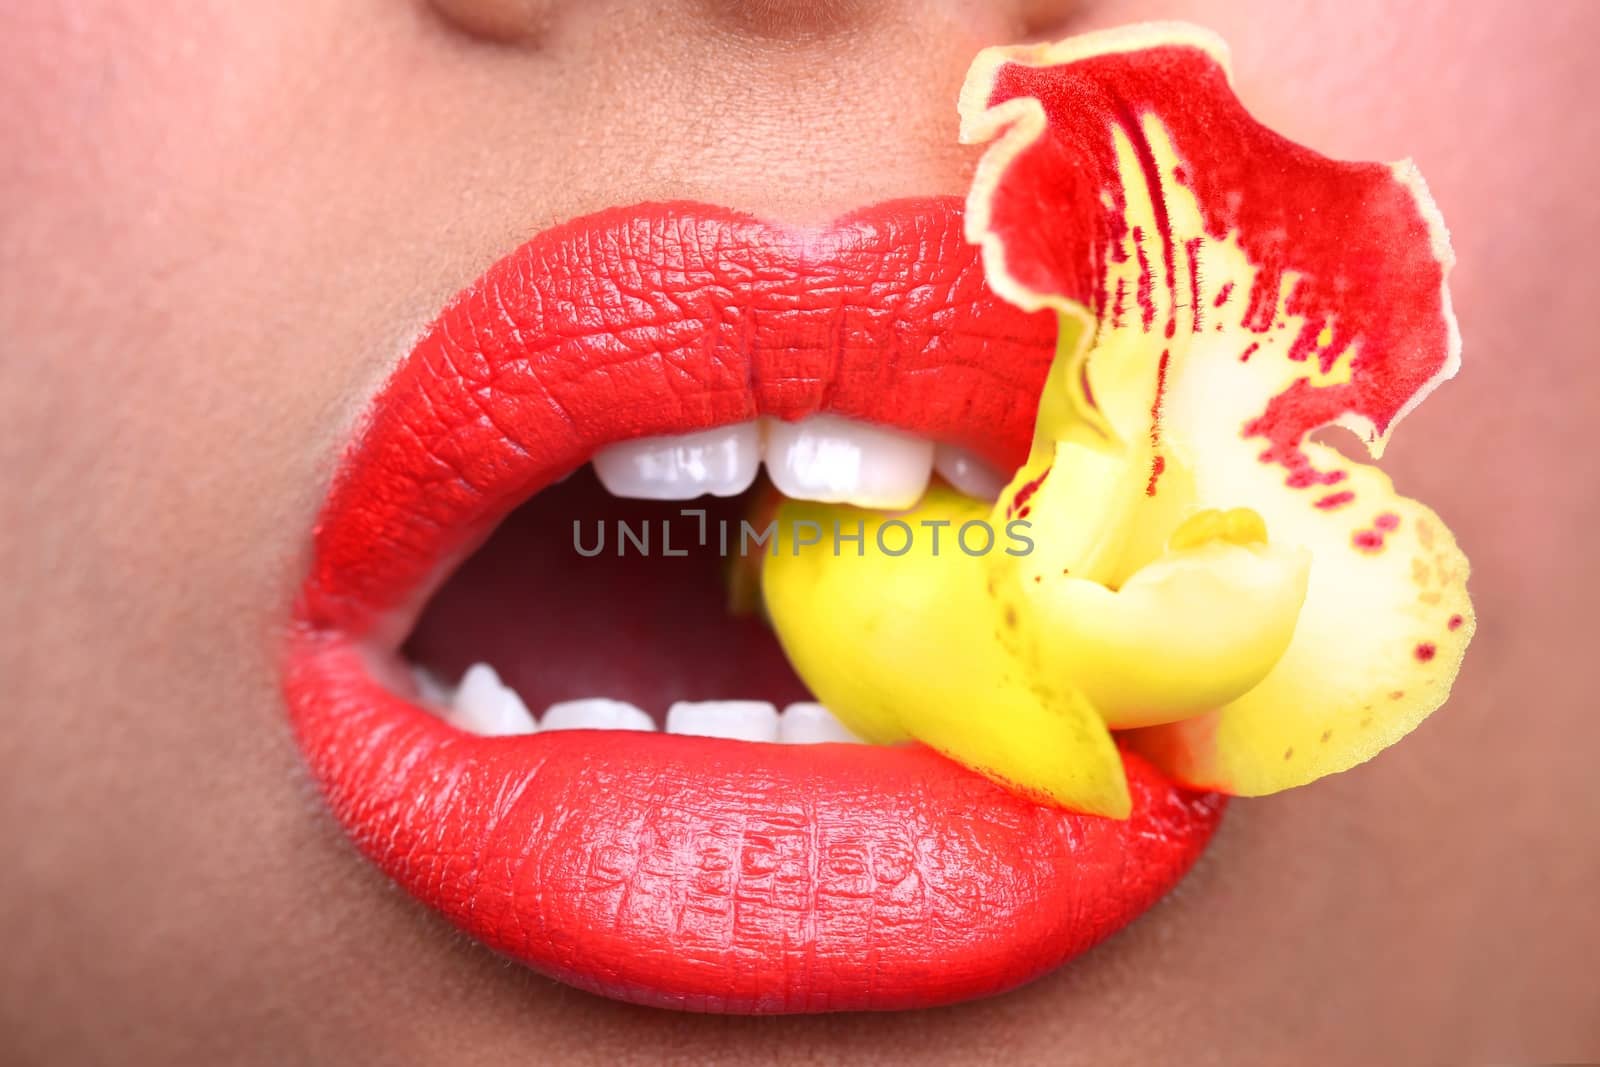 Beautiful Woman With Sensual Lips Holding Flower in Mouth